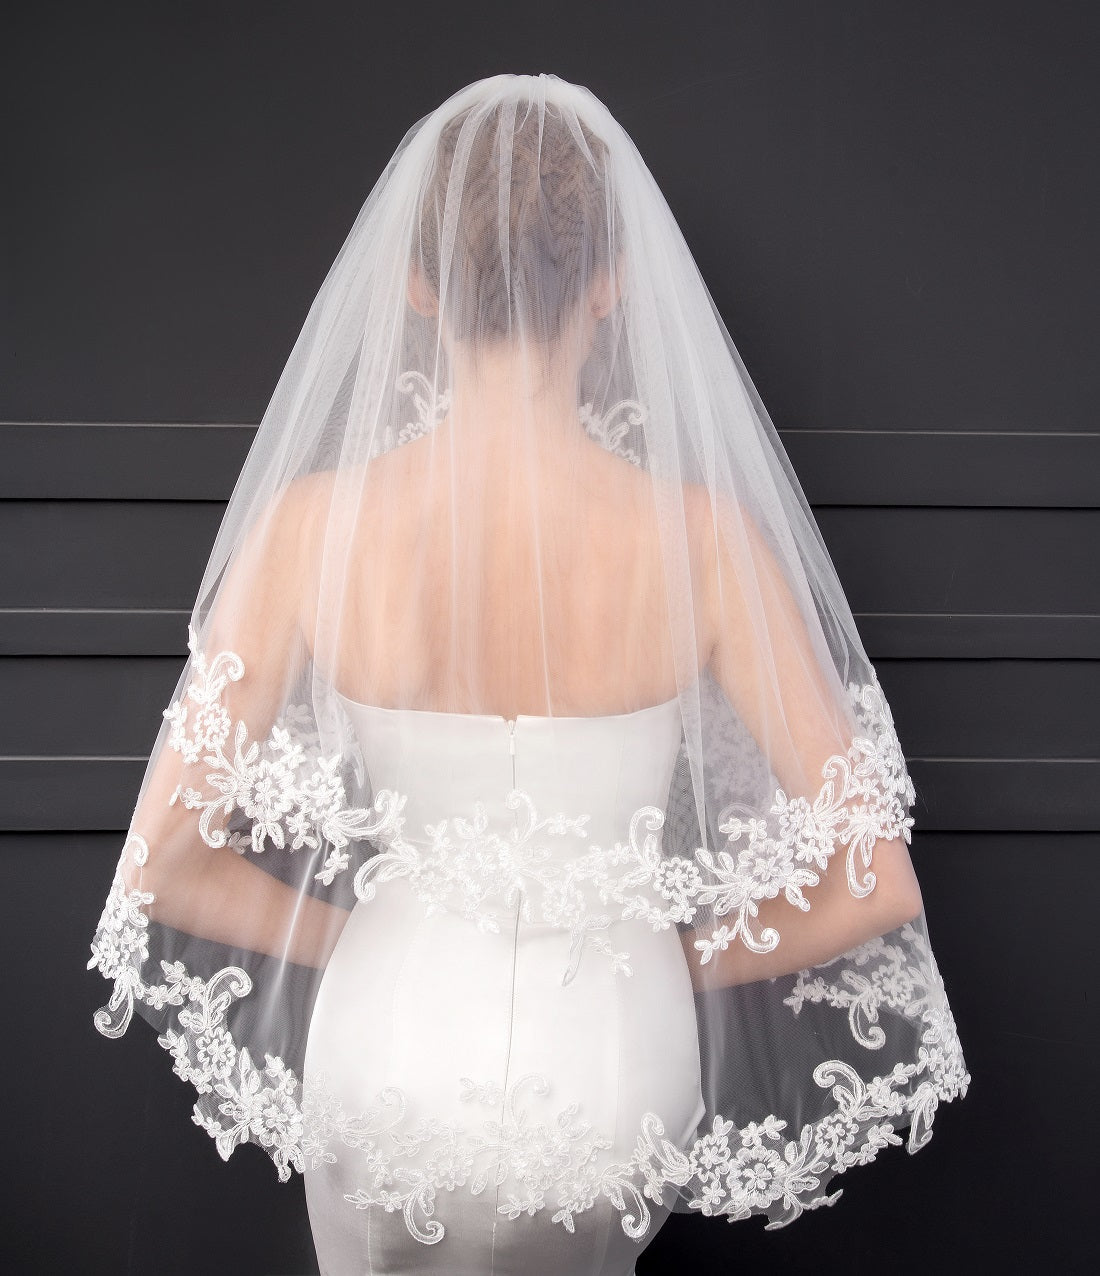 Two Tier Ivory Lace Short Bridal Veils Mid Length Wedding Veil ACC1065